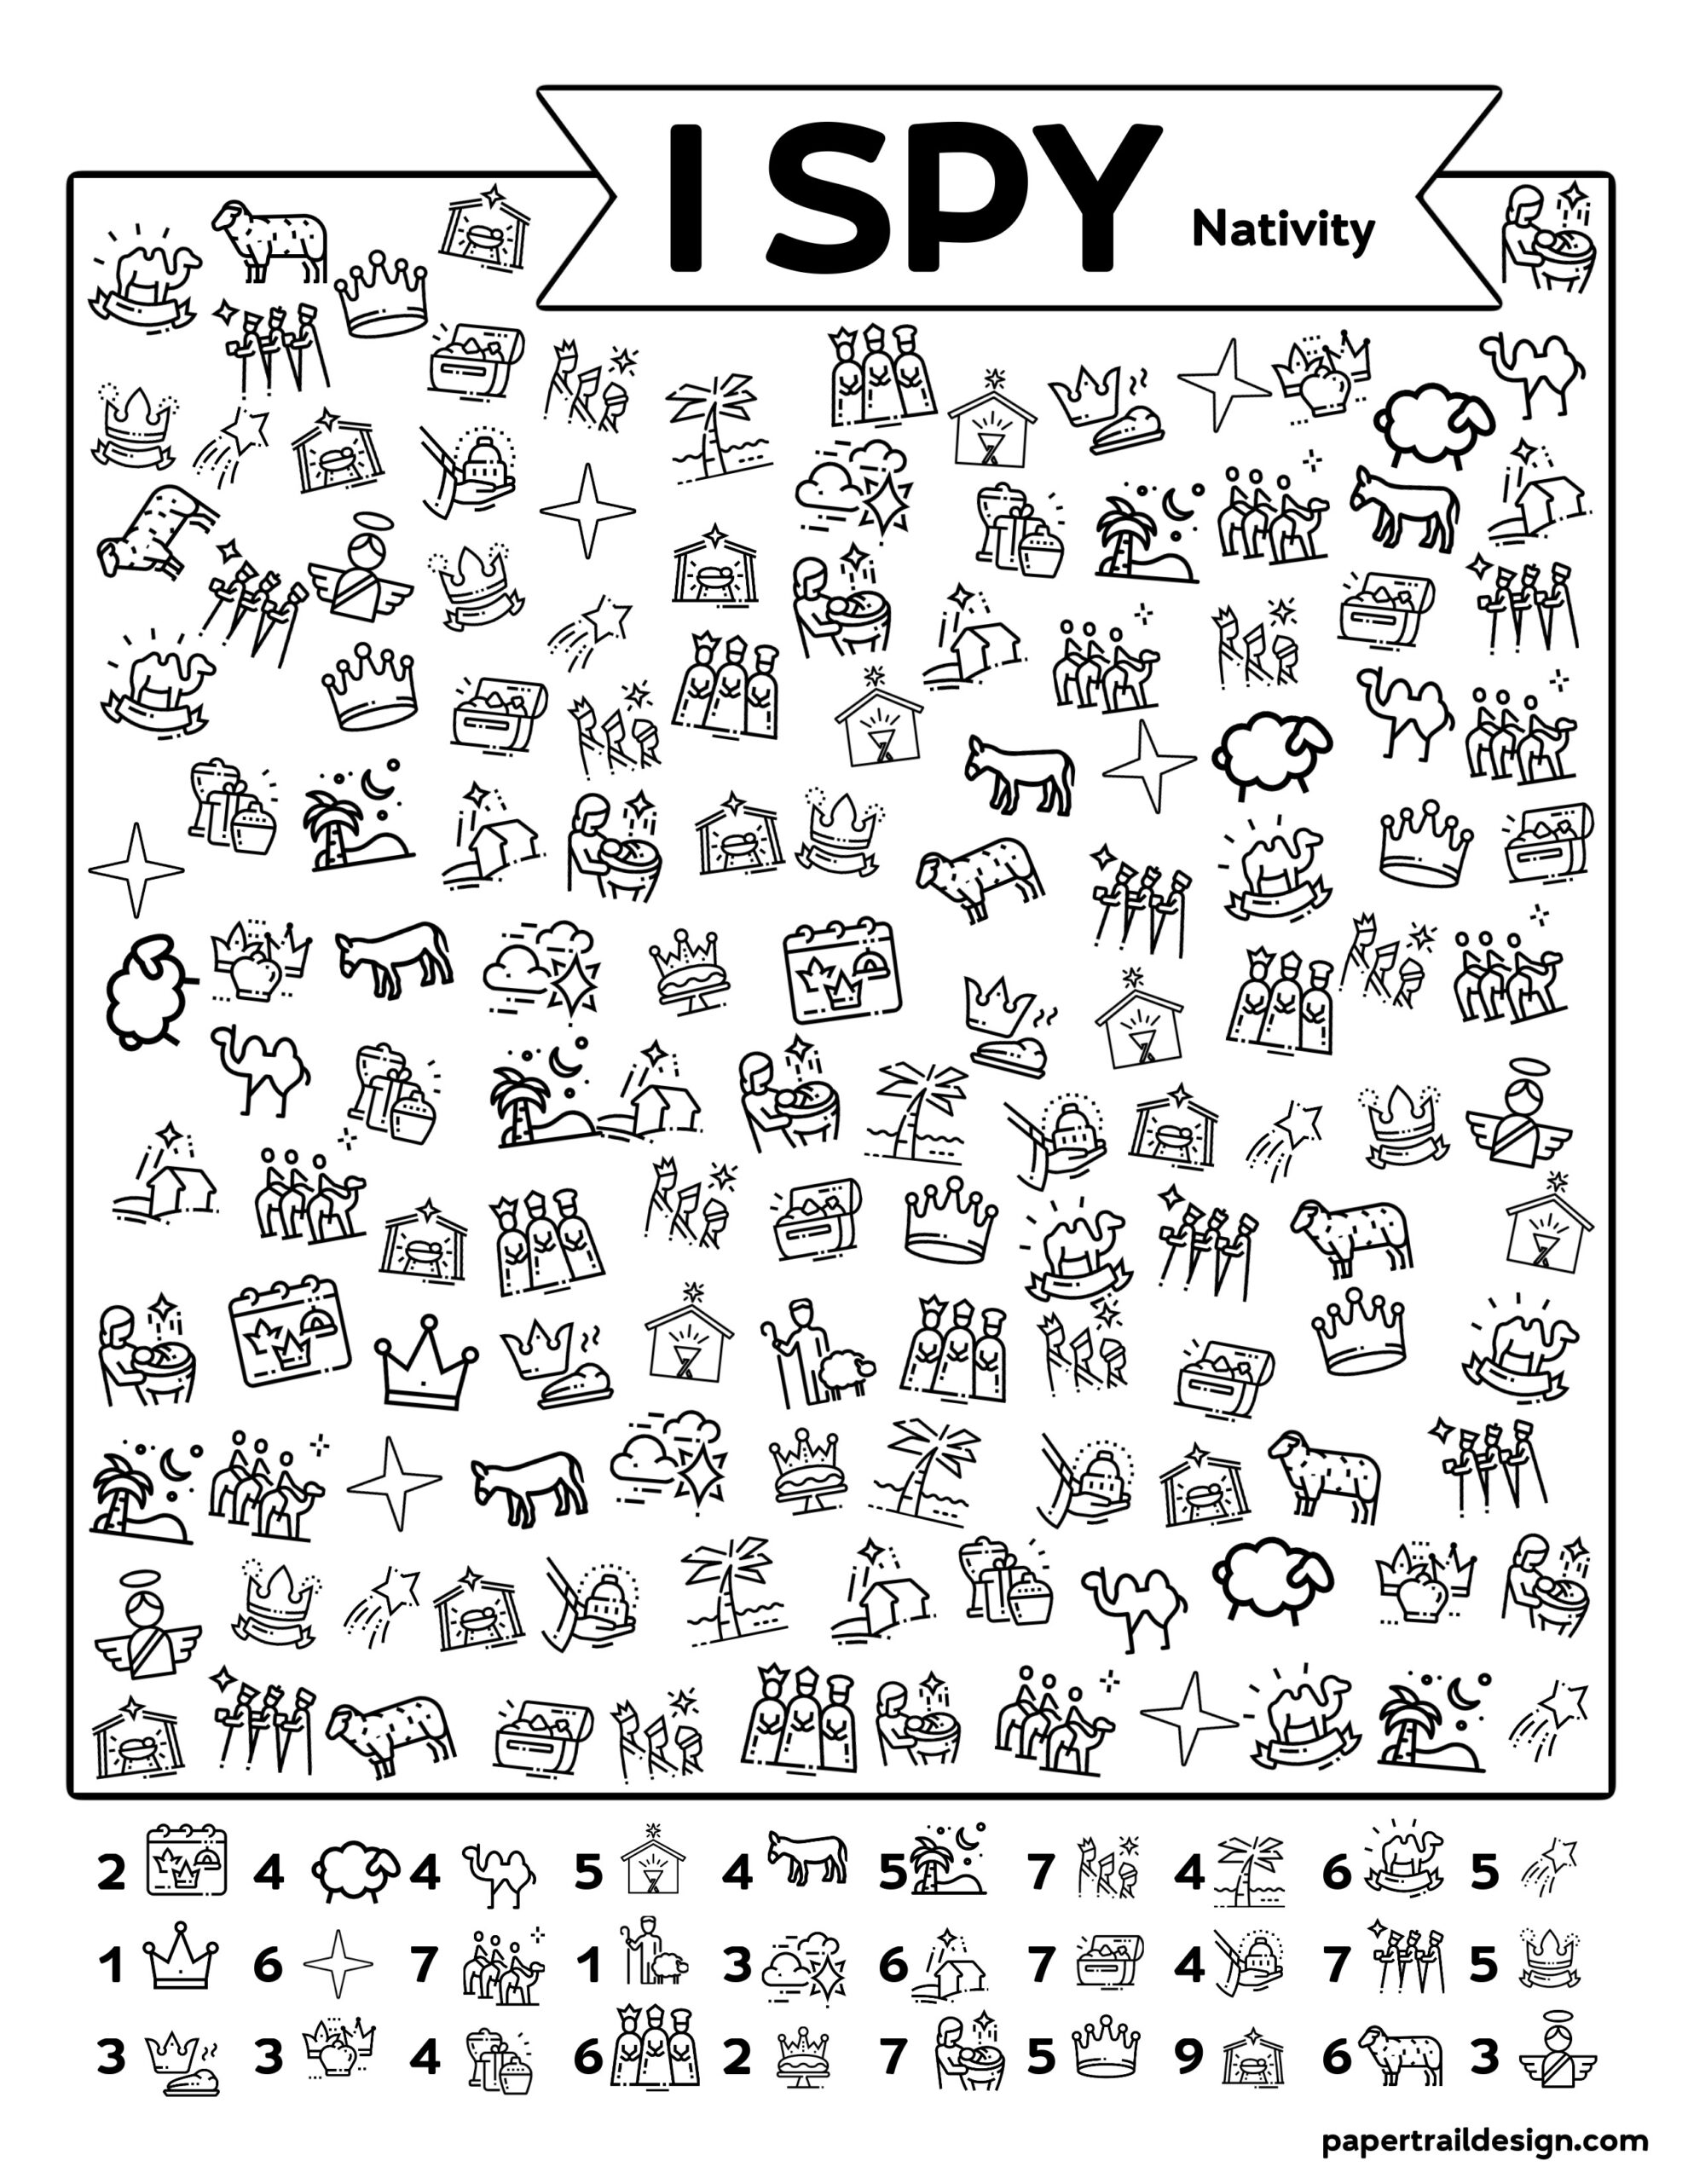 nativity-worksheets-printables-printable-word-searches